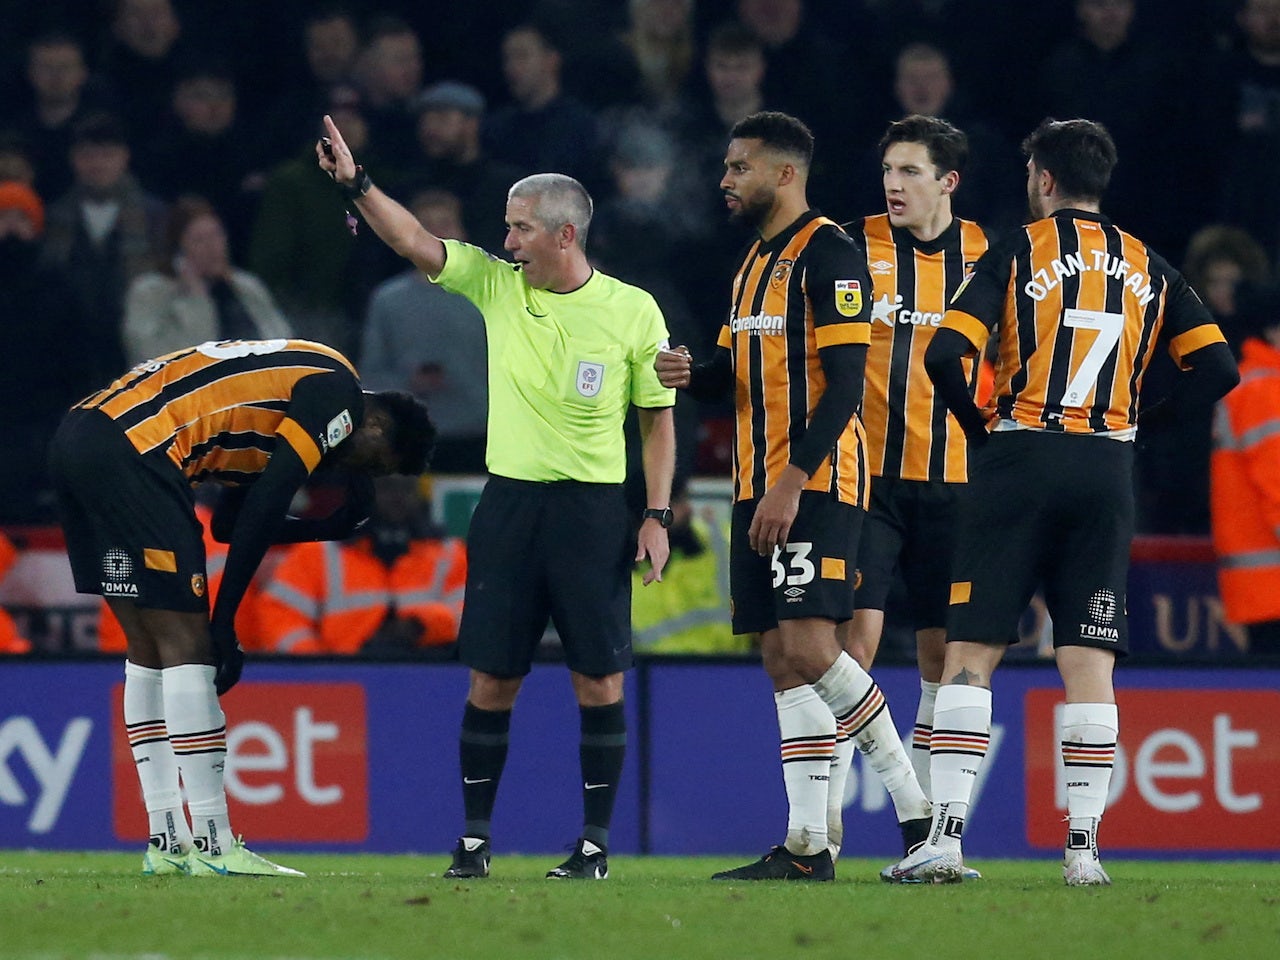 Hull City  2022/23 Championship line-up confirmed